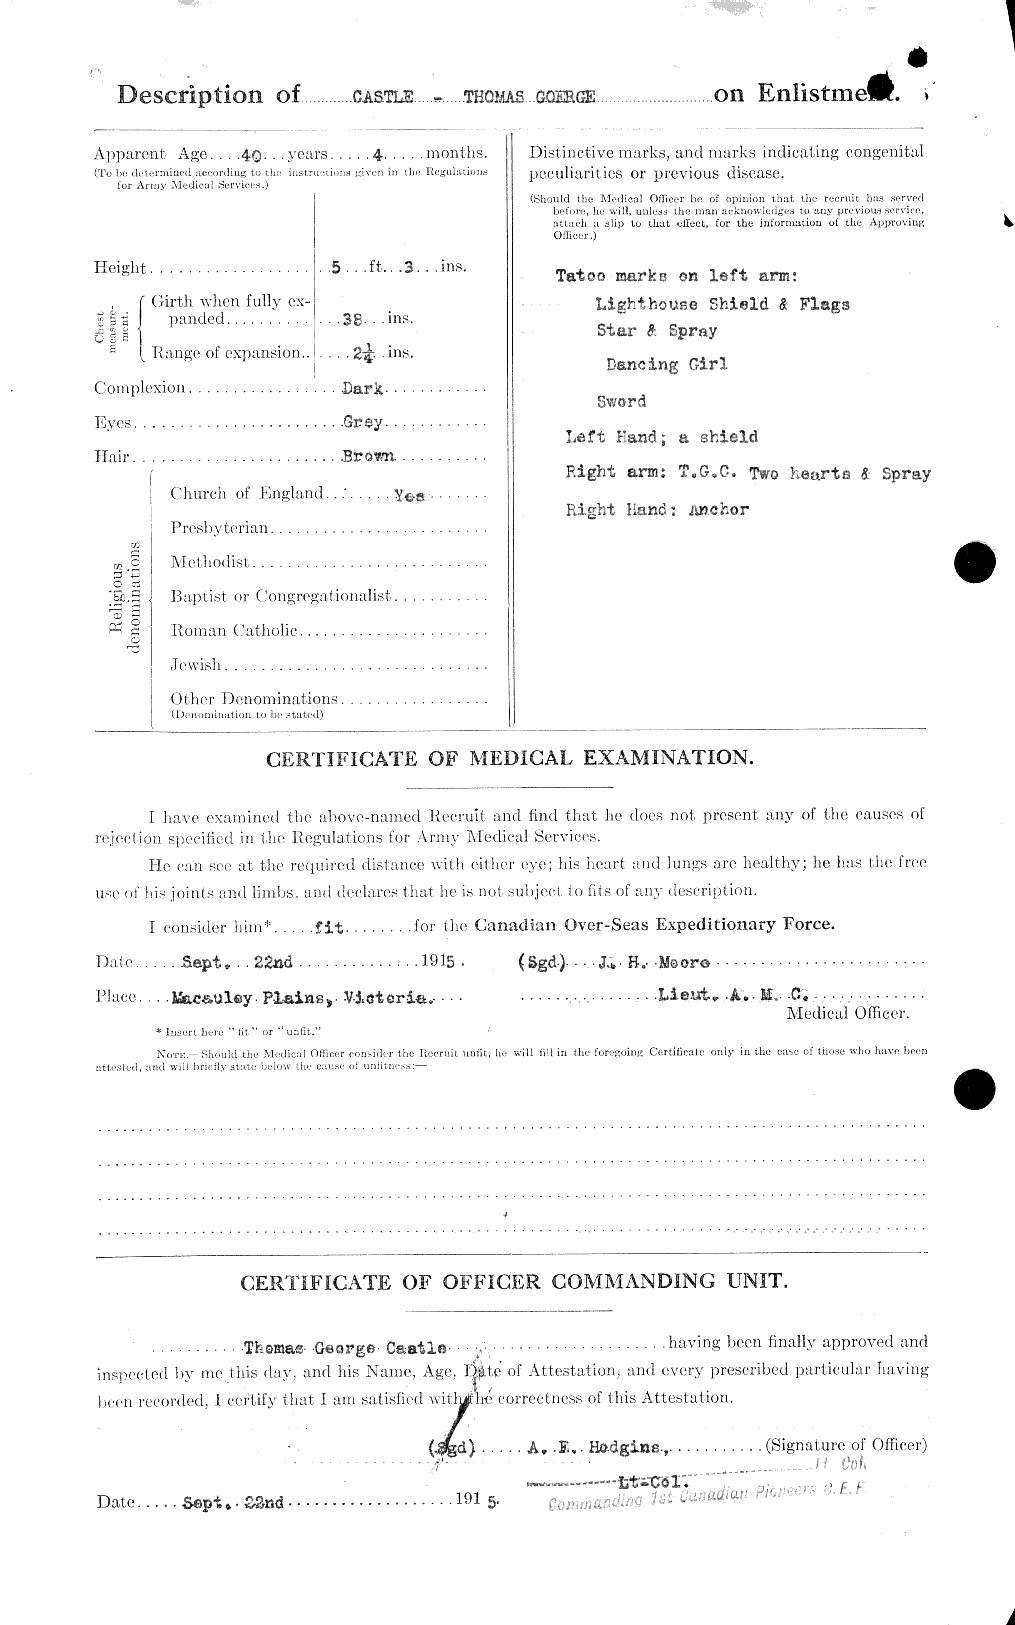 Personnel Records of the First World War - CEF 013105b